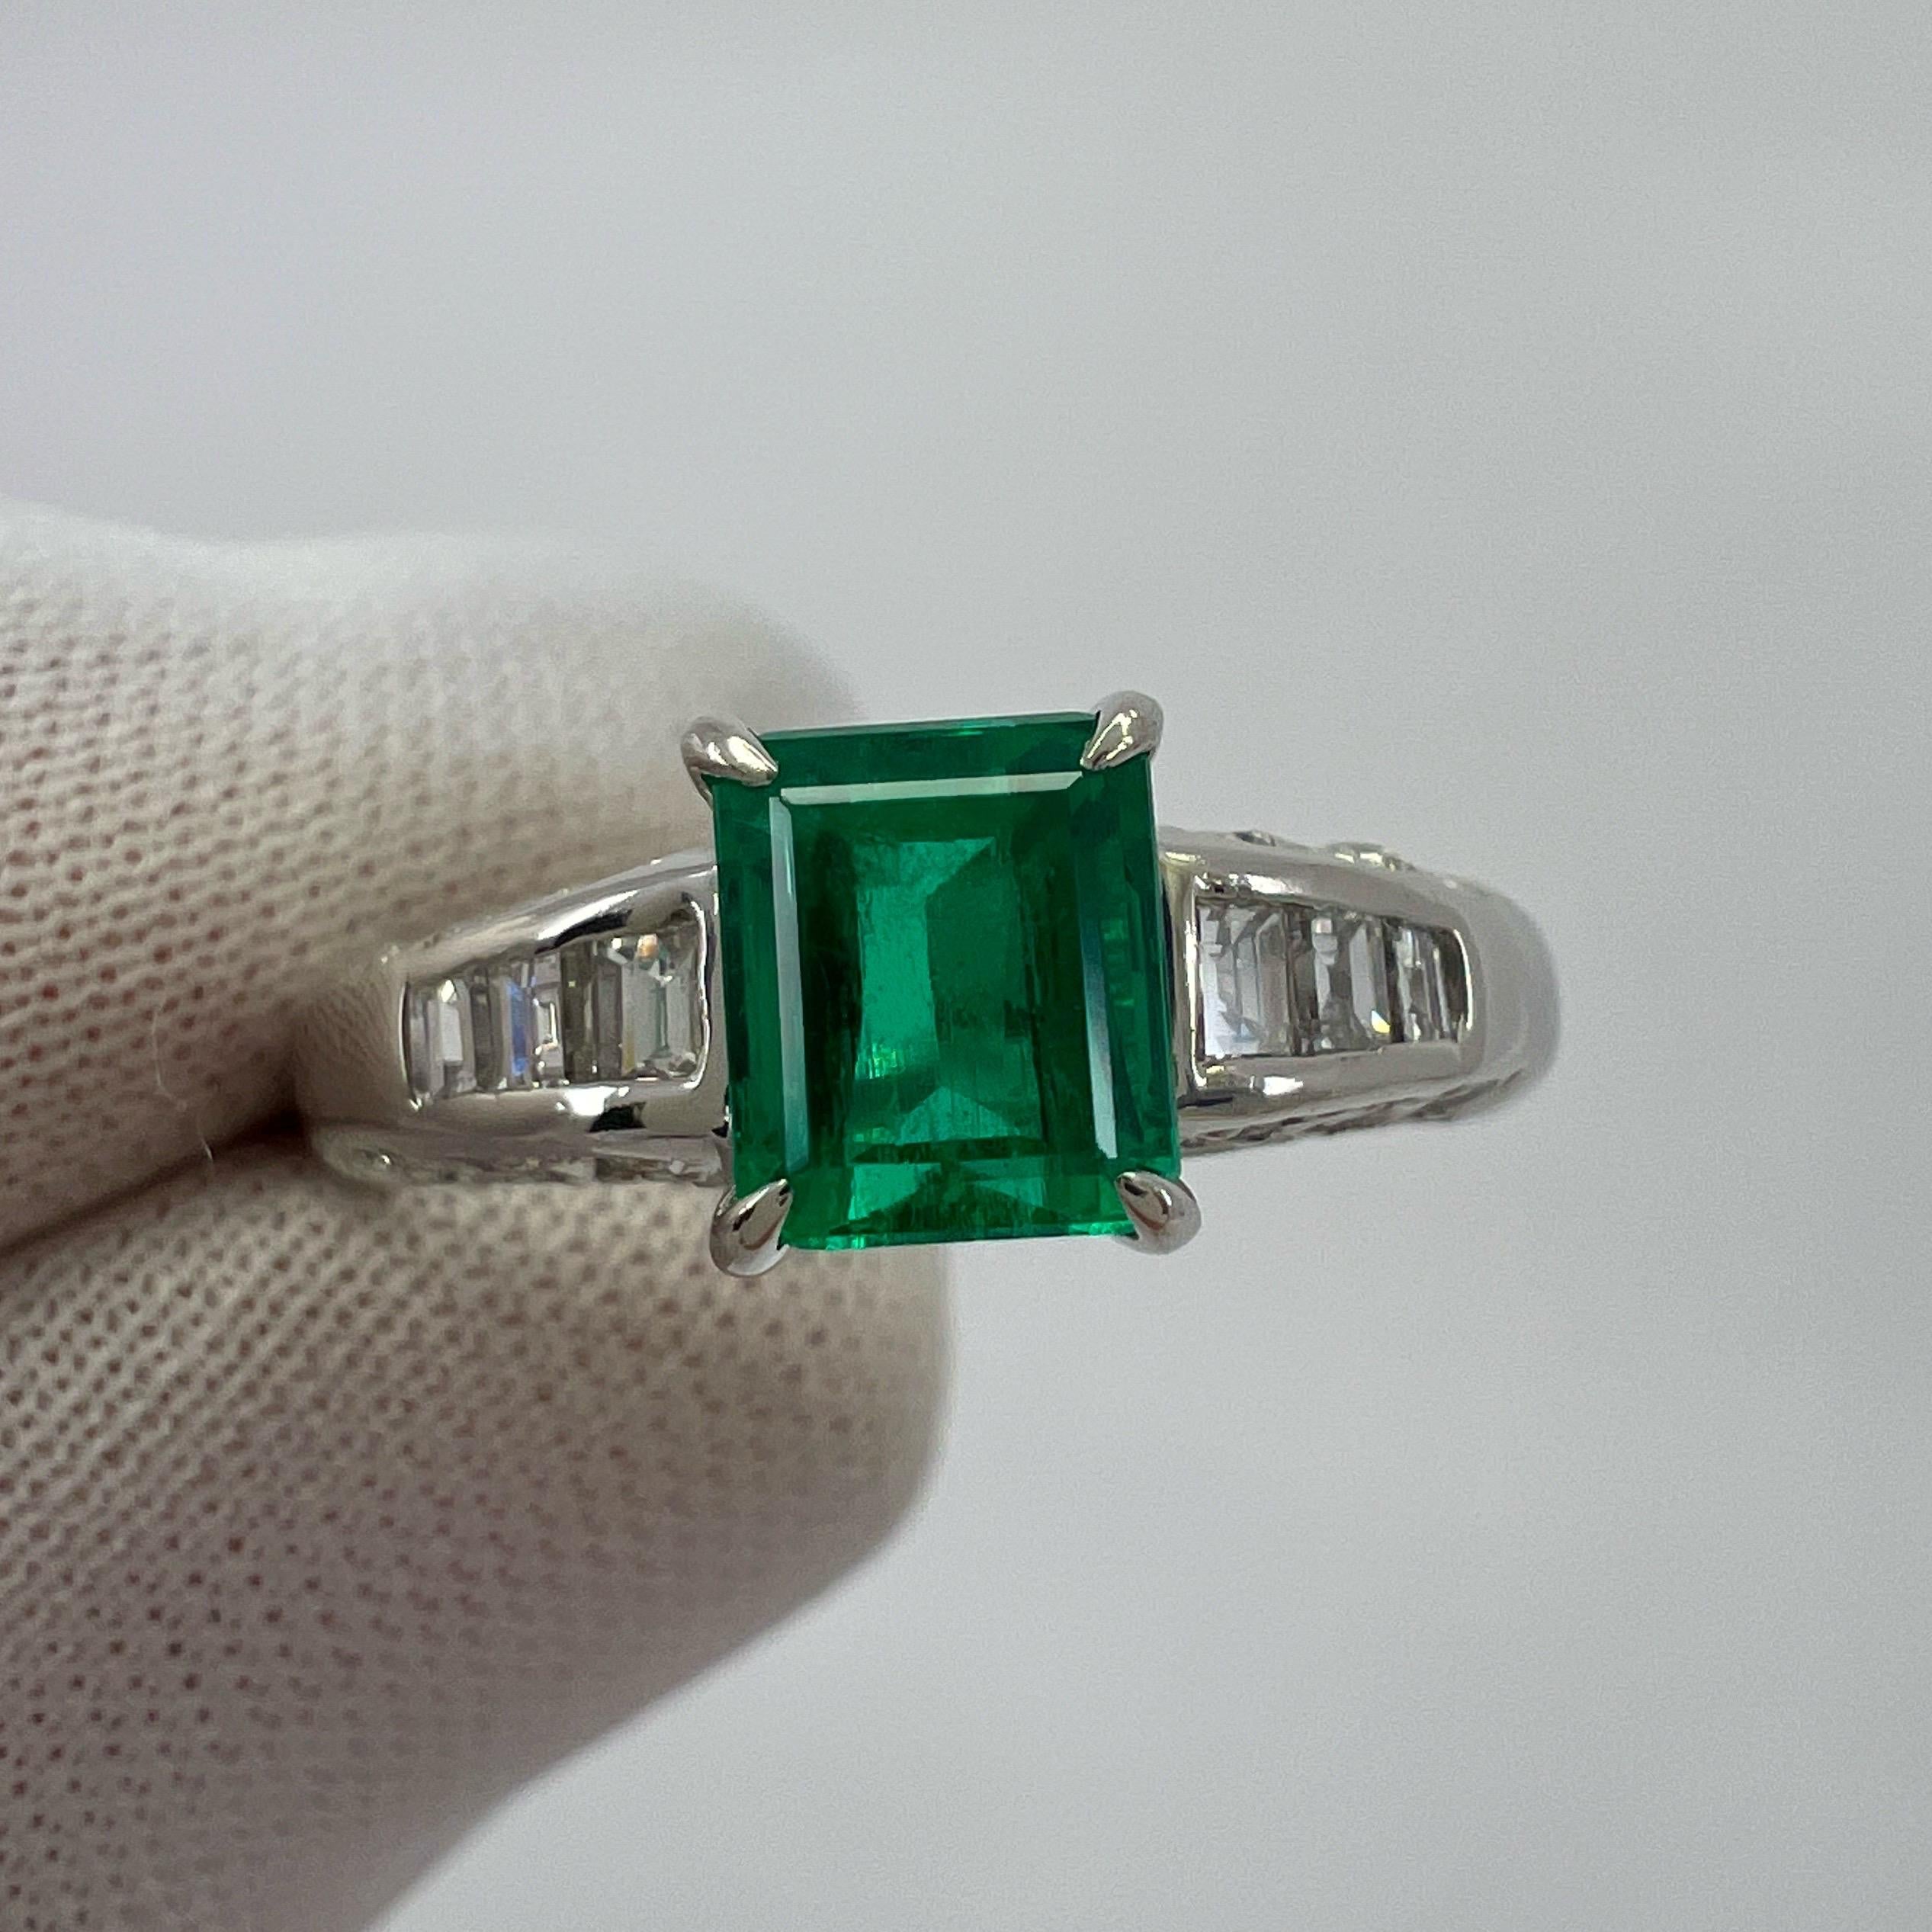 Fine Vivid Green Colombian Emerald & Diamond Platinum Solitaire Ring With Accents.

Total carat weight 1.08. Featuring a stunning 0.78 carat Colombian emerald with a fine vivid green colour and an excellent emerald cut. Measuring 5.8x4.8mm.
The